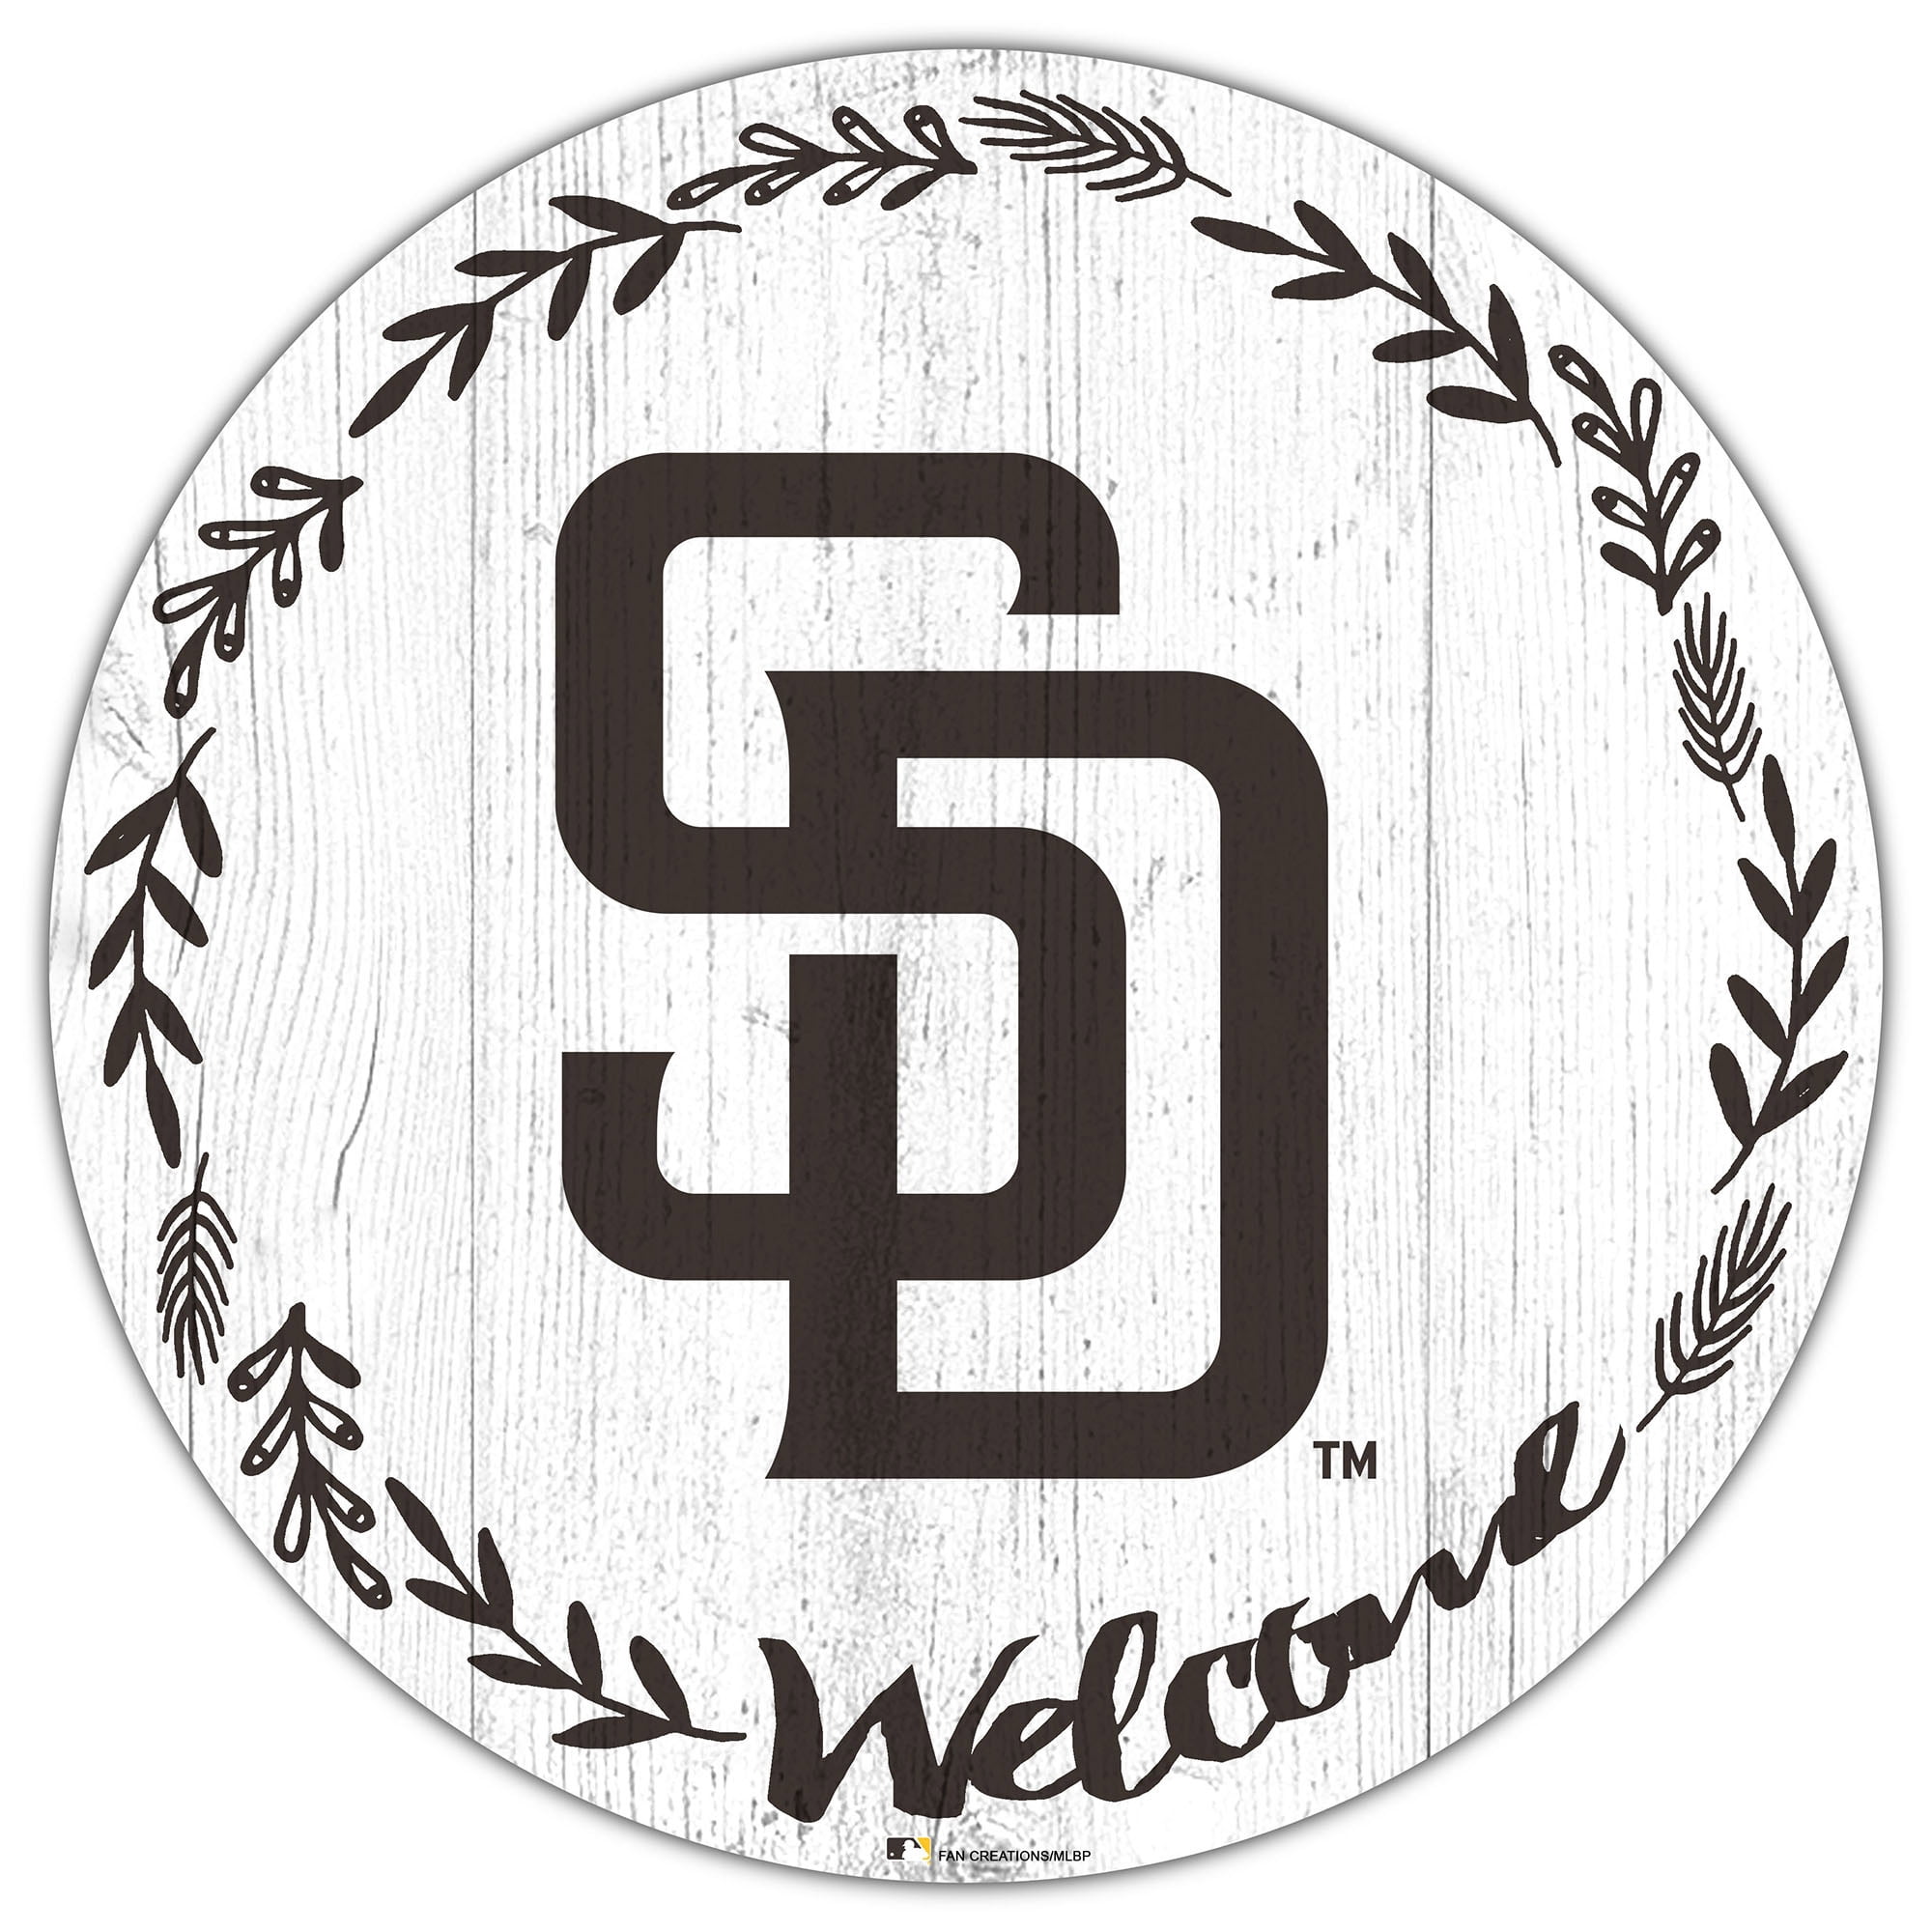  Your Fan Shop for San Diego Padres